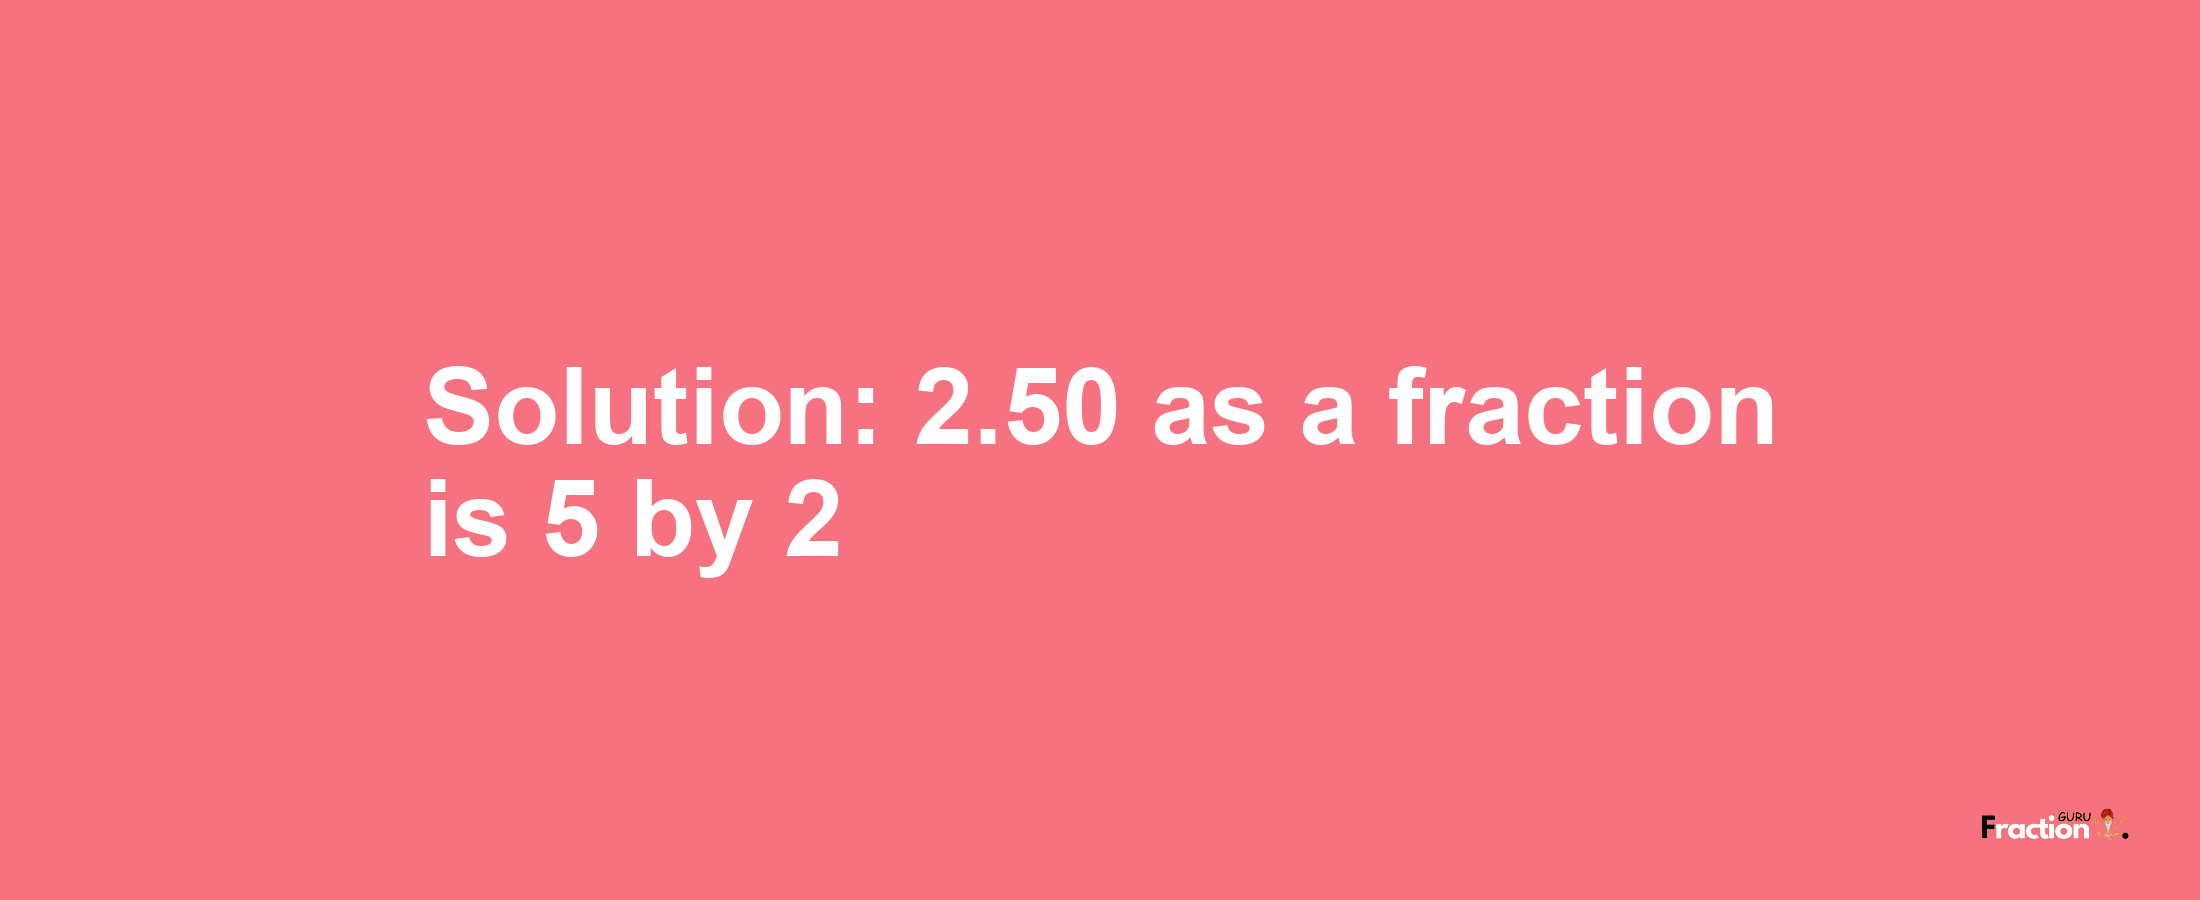 Solution:2.50 as a fraction is 5/2